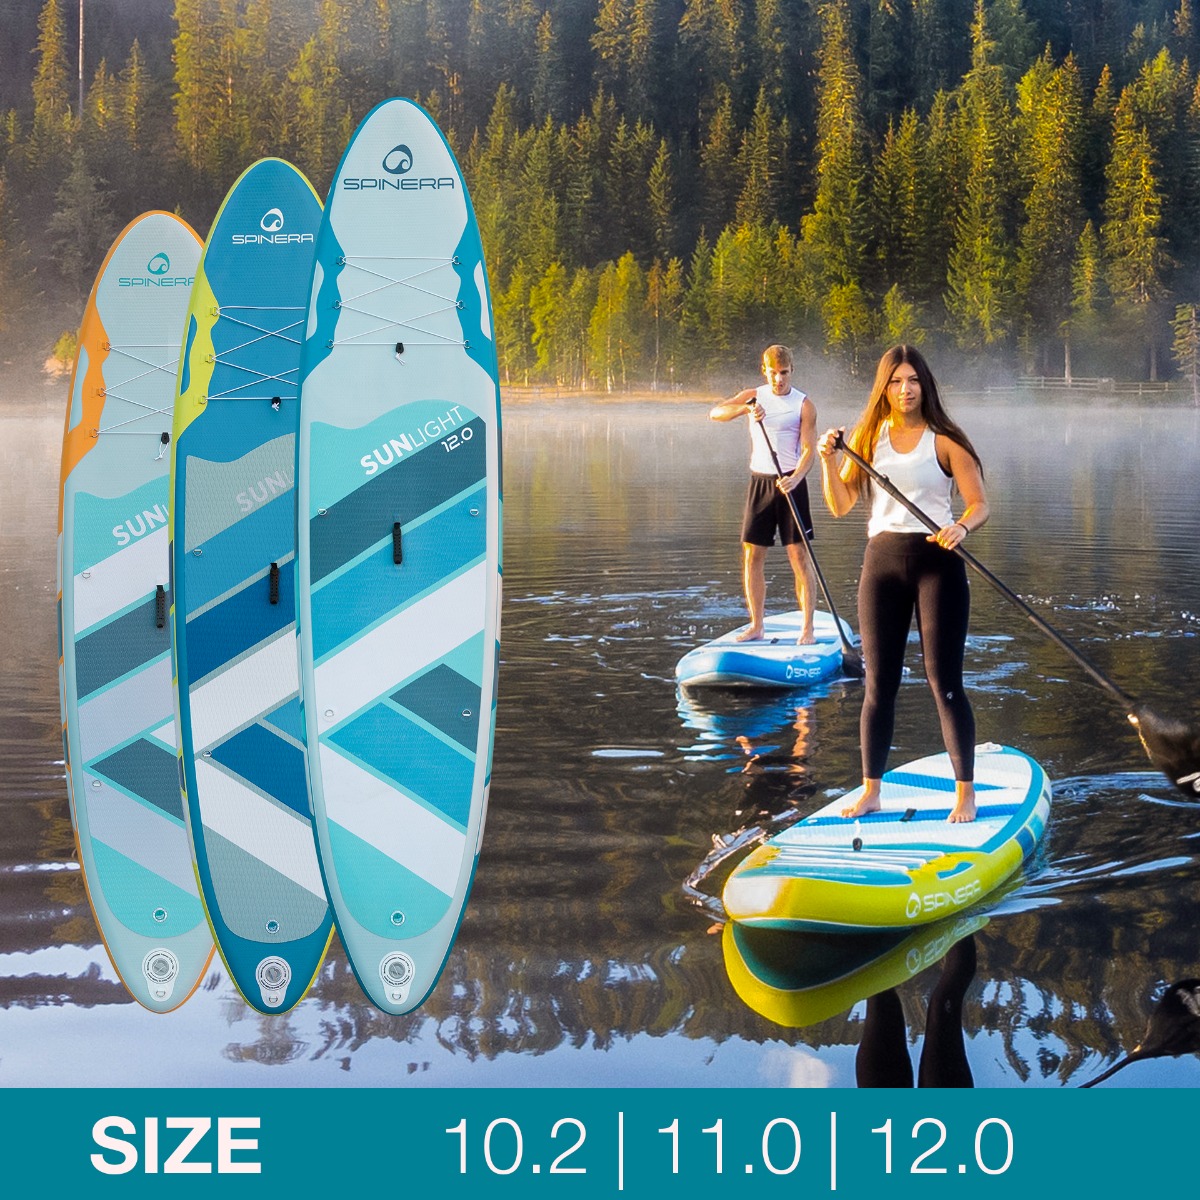 Spinera Stand Up Paddle Boards, SUP jetzt kaufen!